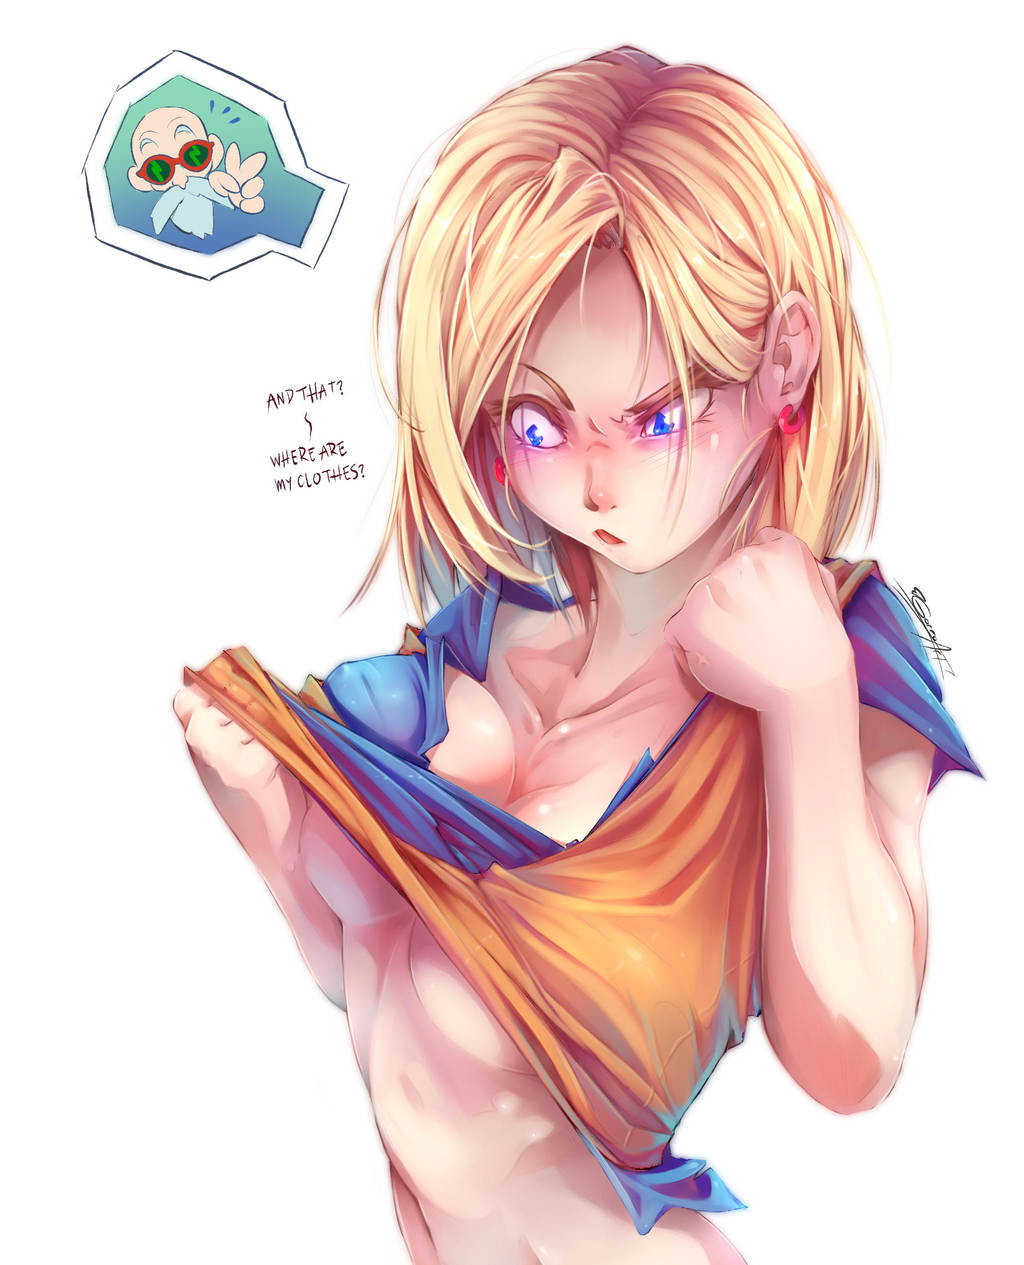 android_18___dragon_ball___fanart___speed_painting_by_gorroazul_dcgnj4z-fullview.jpg